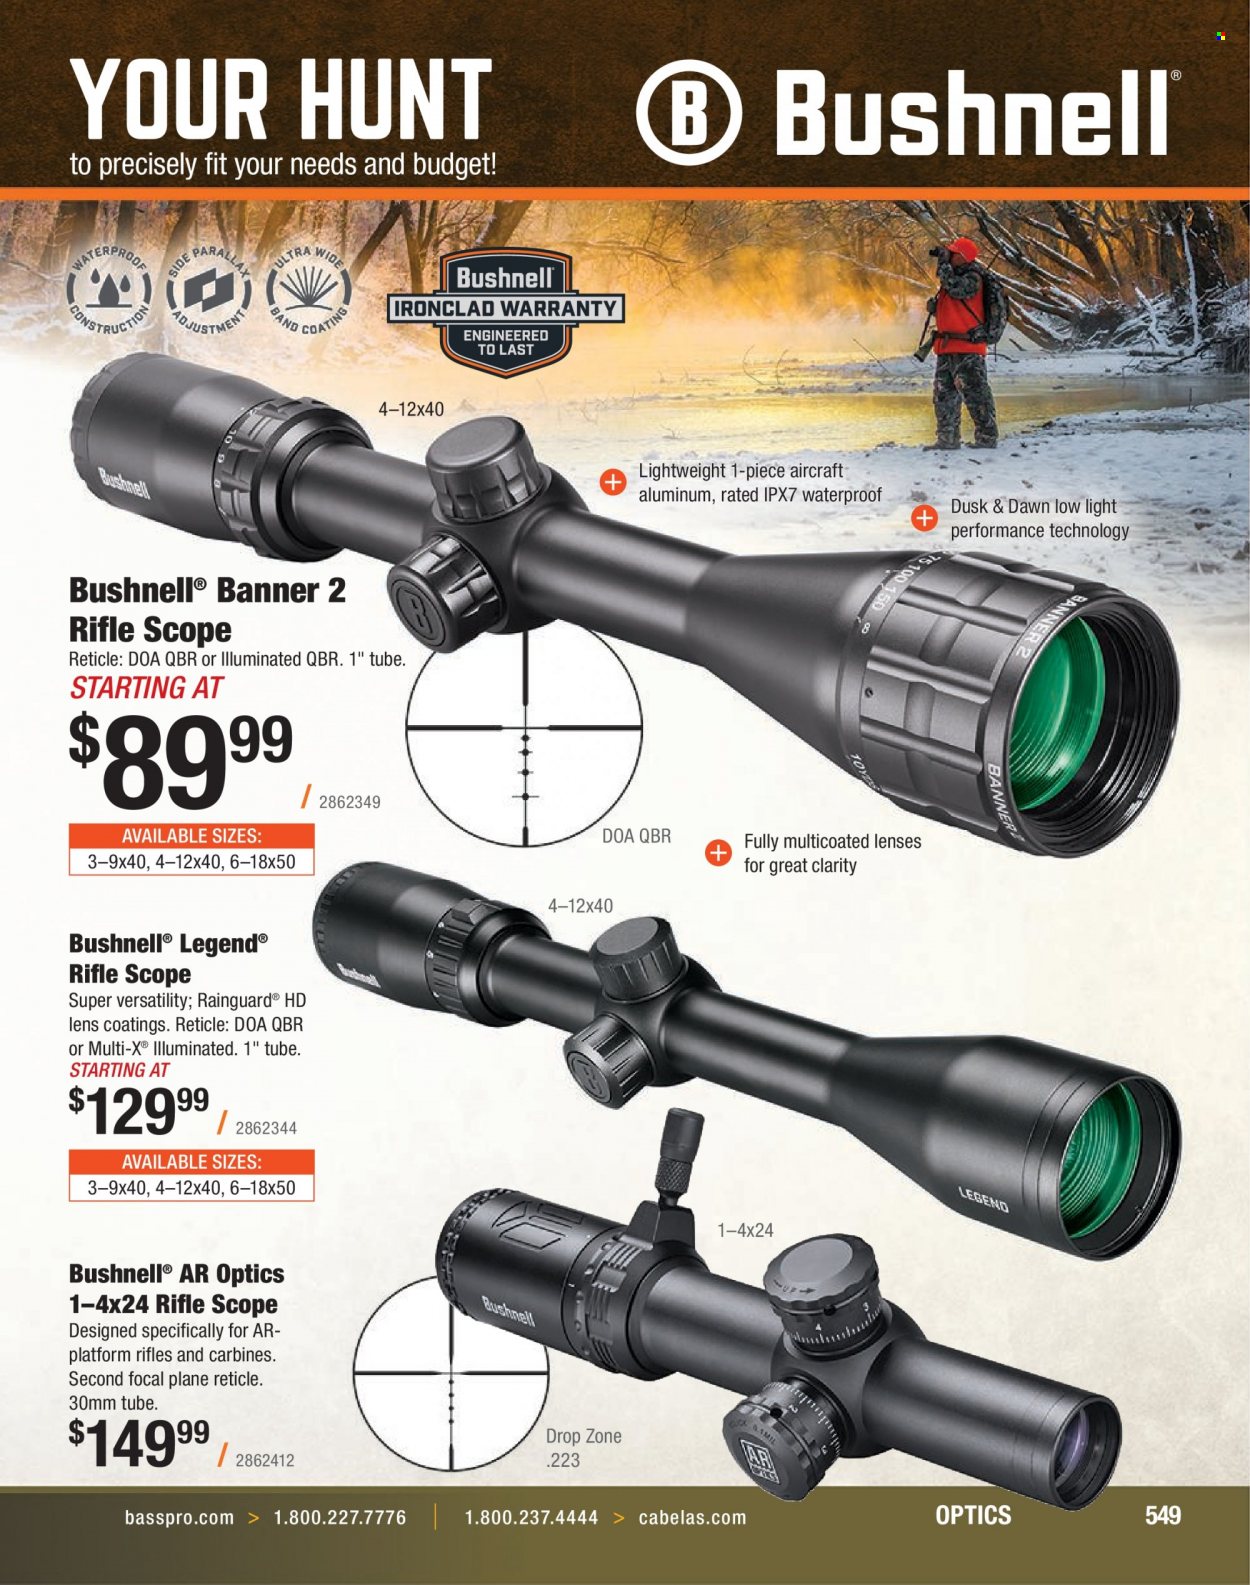 Bass Pro Shops flyer . Page 549.